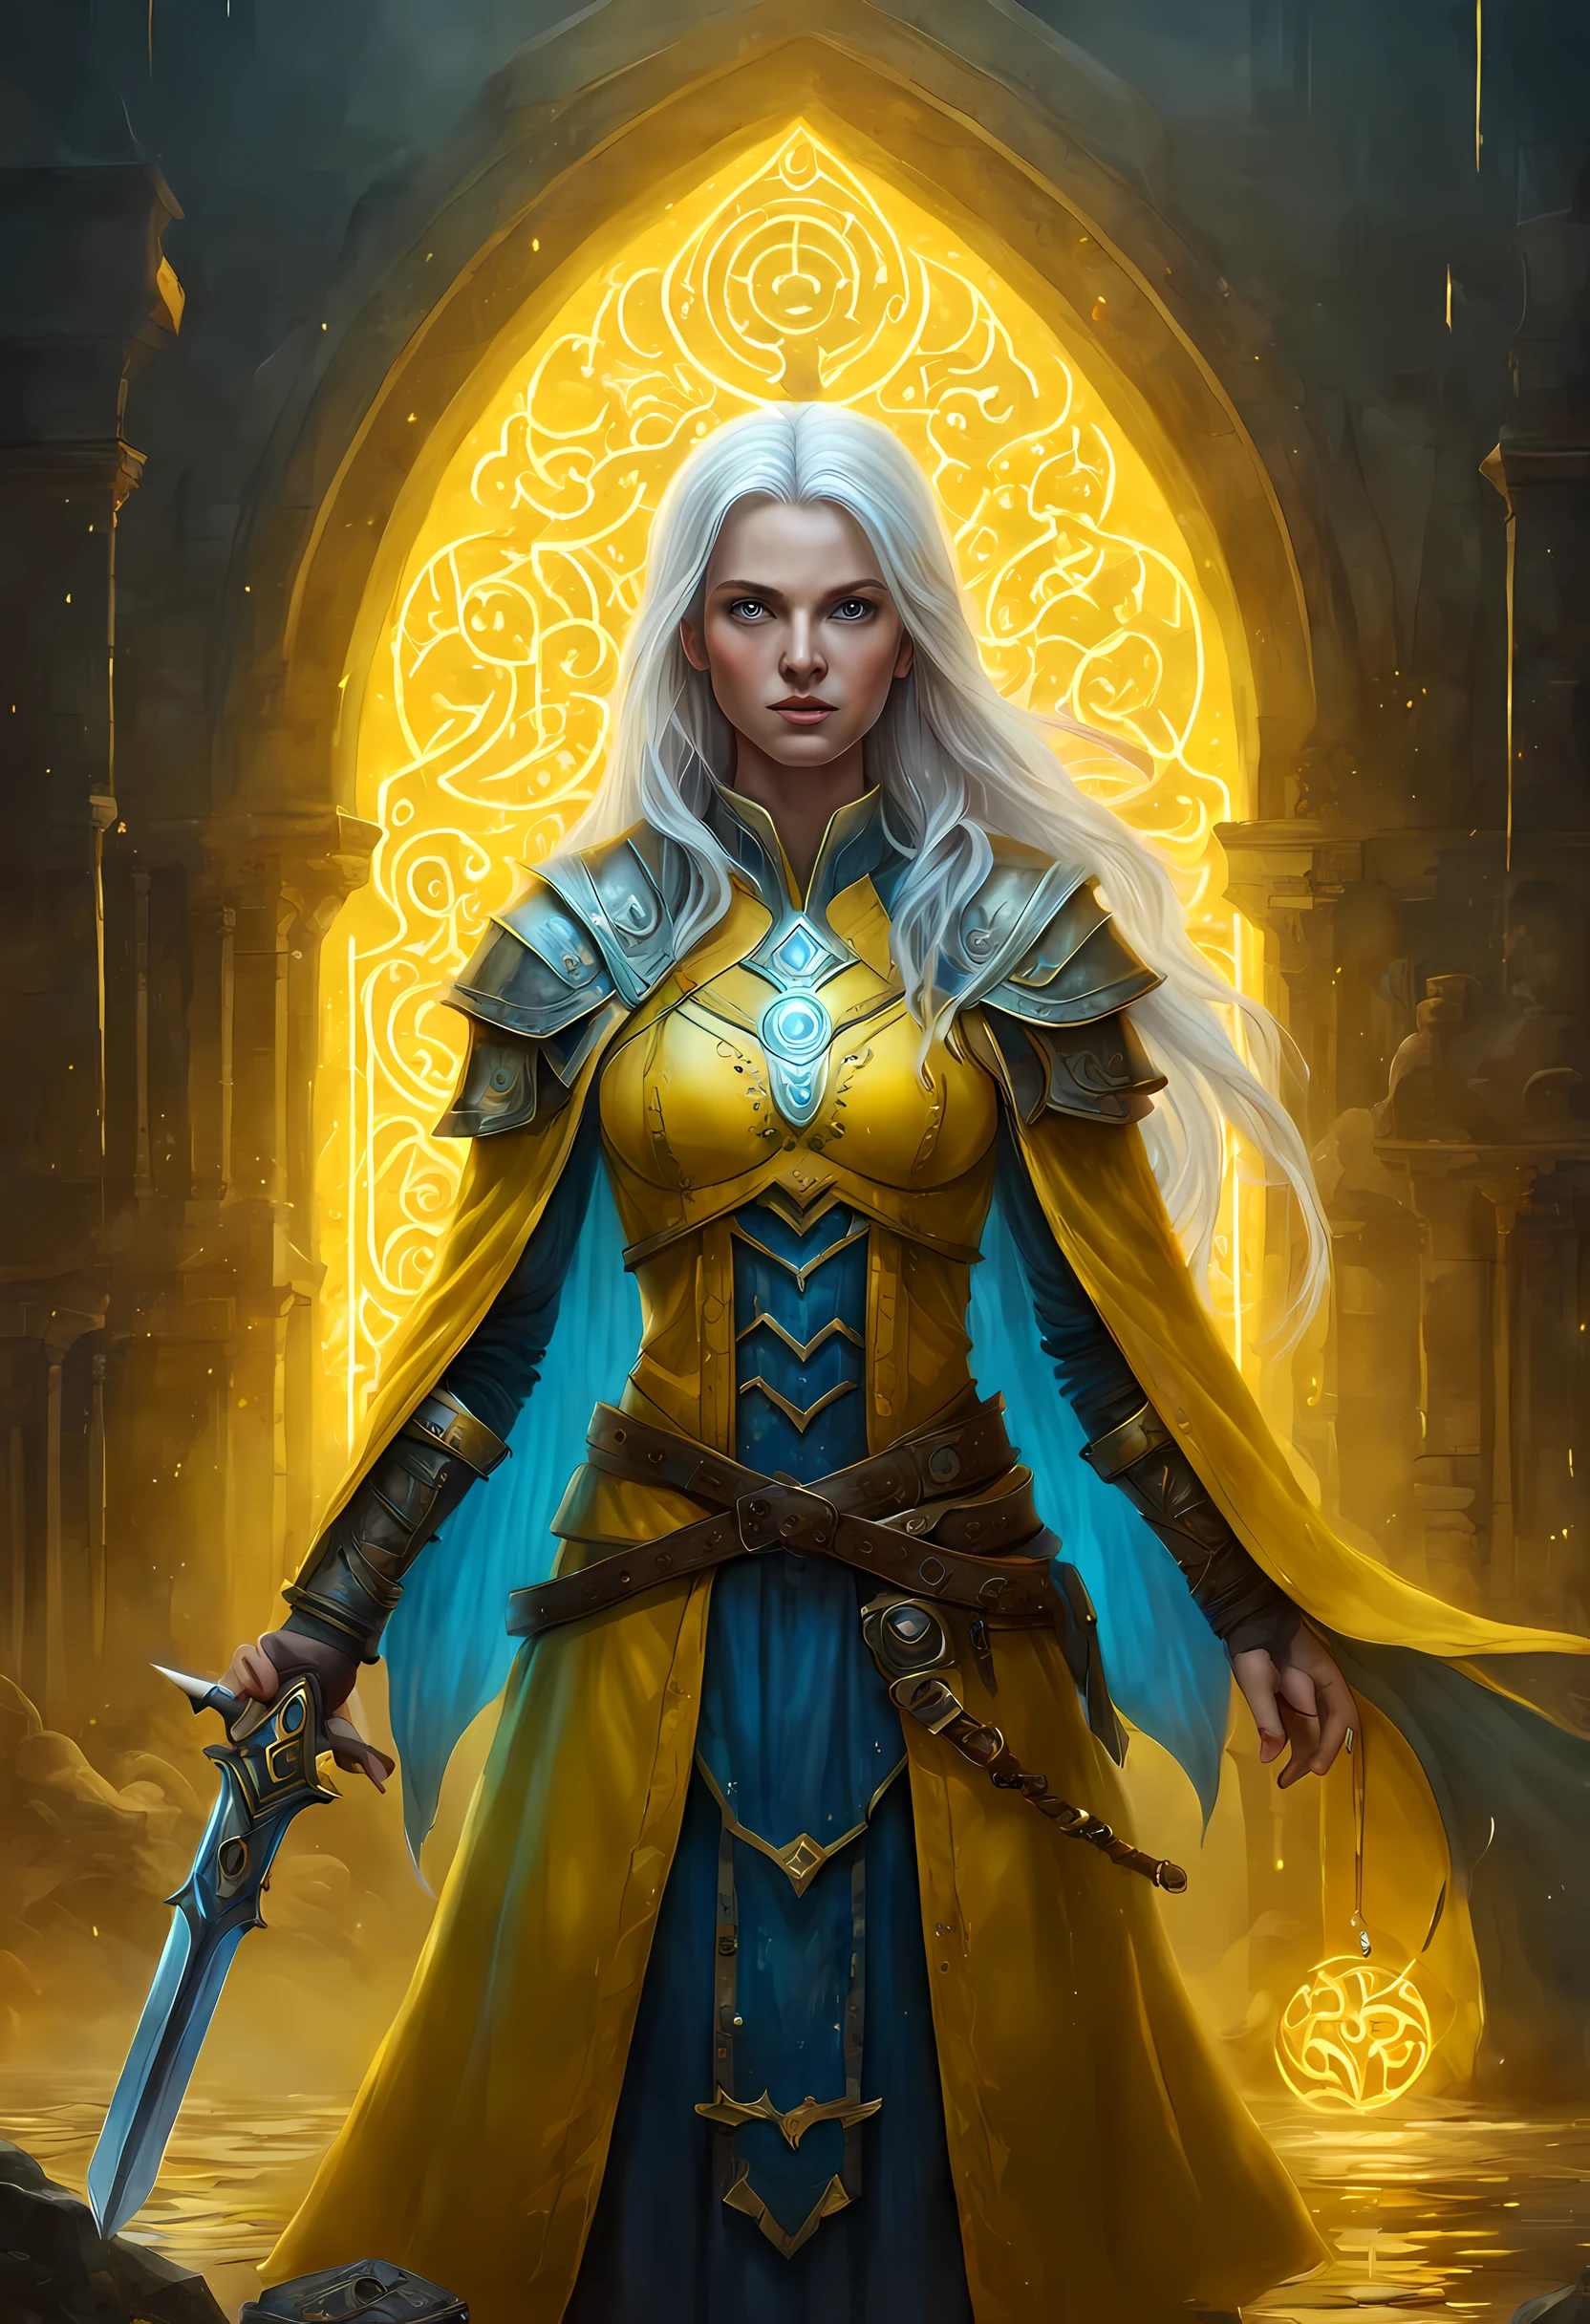 fantasy art, dnd art, RPG art, wide shot, (masterpiece: 1.4) a (portrait: 1.3) intense details, highly detailed, photorealistic, best quality, highres, GlowingRunesAI_yellow, portrait a female (fantasy art, Masterpiece, best quality: 1.3) , blue skasy art, Masterpiece, best quality: 1.3), intense details facial details, exquisite beauty, (fantasy art, Masterpiece, best quality) cleric, (blue: 1.3) skinned female, (white hair: 1.3), long hair, intense (green: 1.3) eye, fantasy art, Masterpiece, best quality) armed a fiery sword red fire, wearing heavy (white: 1.3) half plate mail armor, wearing high heeled laced boots, wearing an(orange :1.3) cloak, wearing glowing holy symbol GlowingRunes_yellow, within fantasy temple background, reflection light, high details, best quality, 16k, [ultra detailed], masterpiece, best quality, (extremely detailed), close up, ultra wide shot, photorealistic, RAW, fantasy art, dnd art, fantasy art, realistic art,((best quality)), ((masterpiece)), (detailed), perfect face, ((no ears: 1.6))